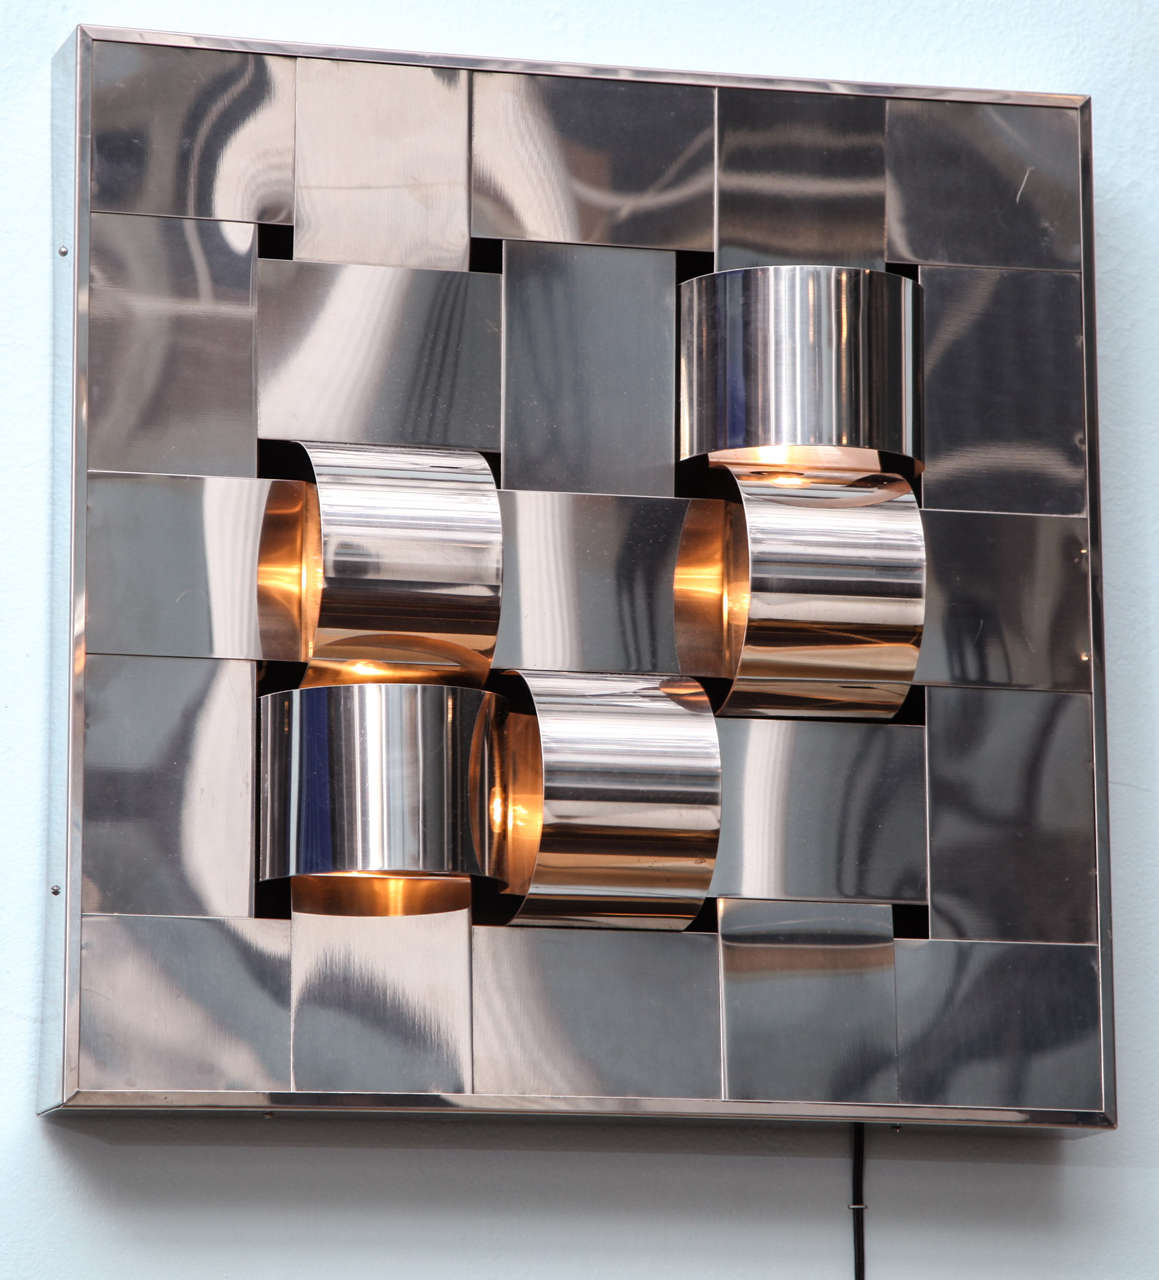 Stainless steel box form with woven strips creating flat and convex lines throughout.  5 illuminated areas that hold candelabra bulbs.